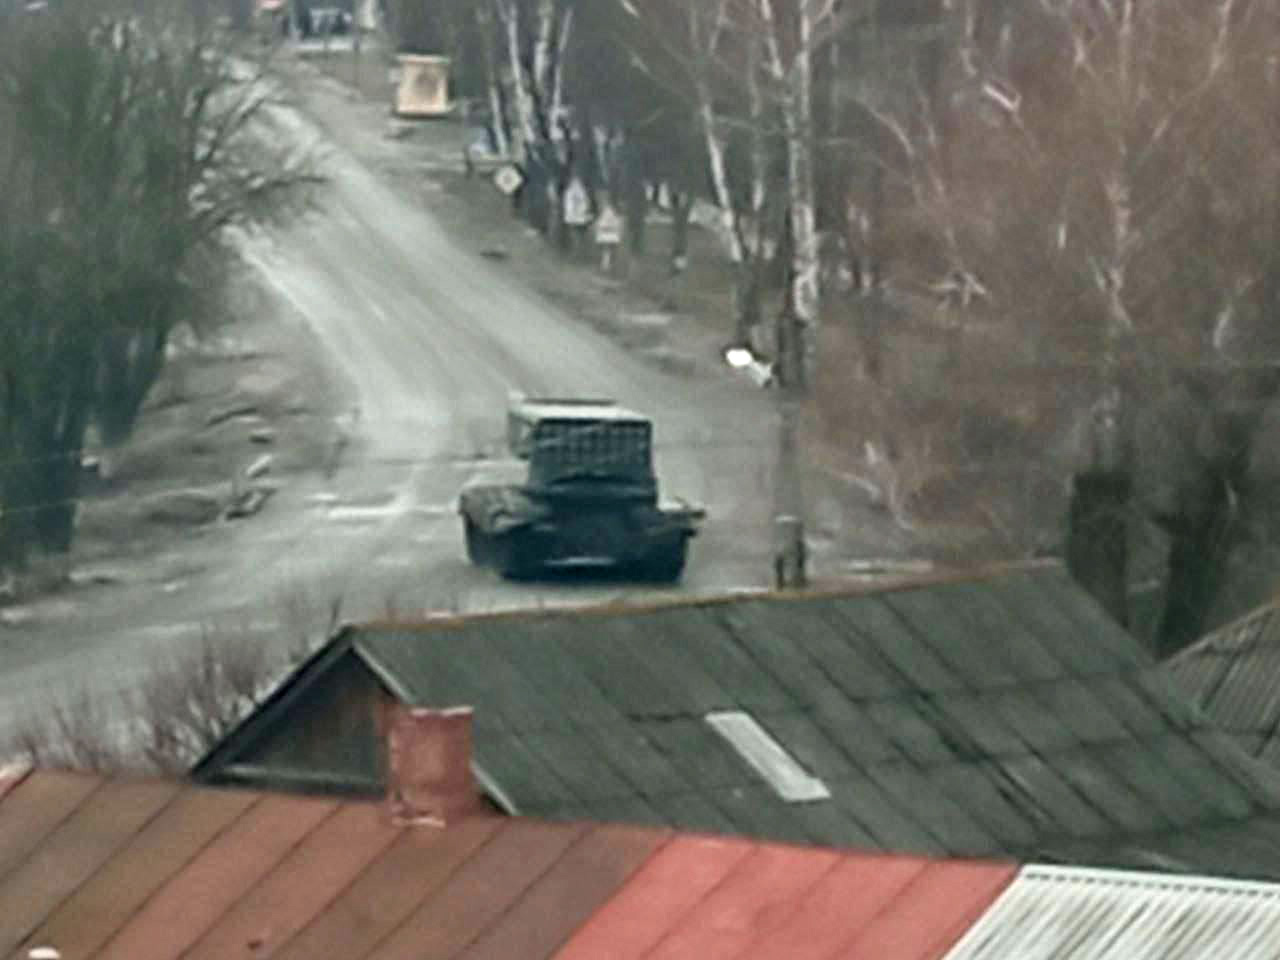 TOS-1A Solntsepyok in the city of Trostyanets